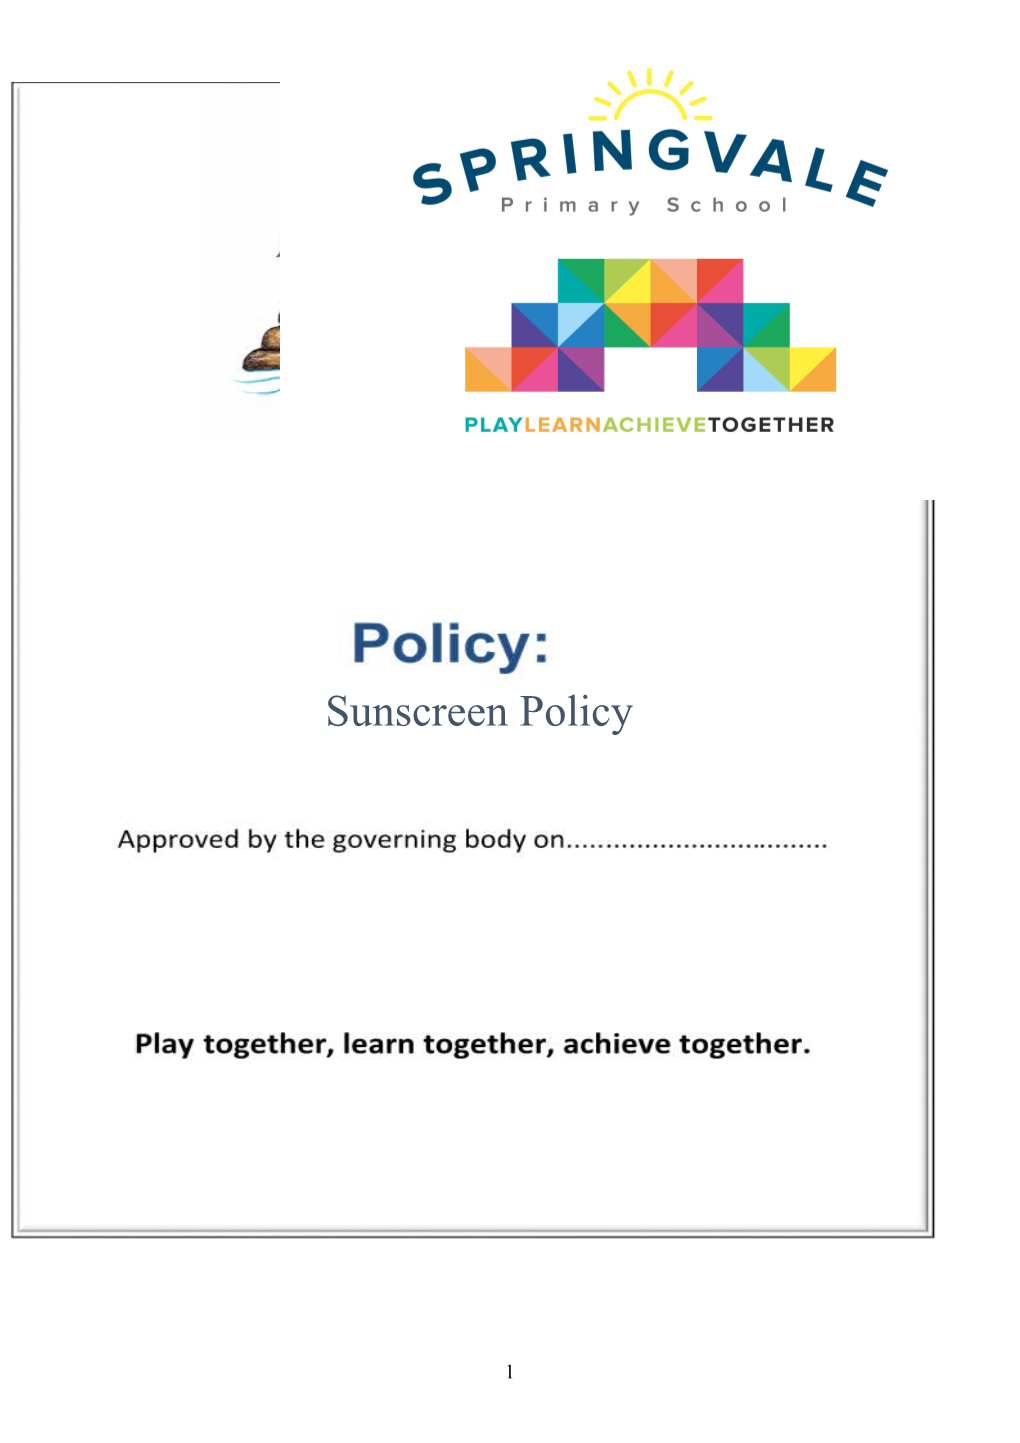 Draft Pshe/Citizenship Policy